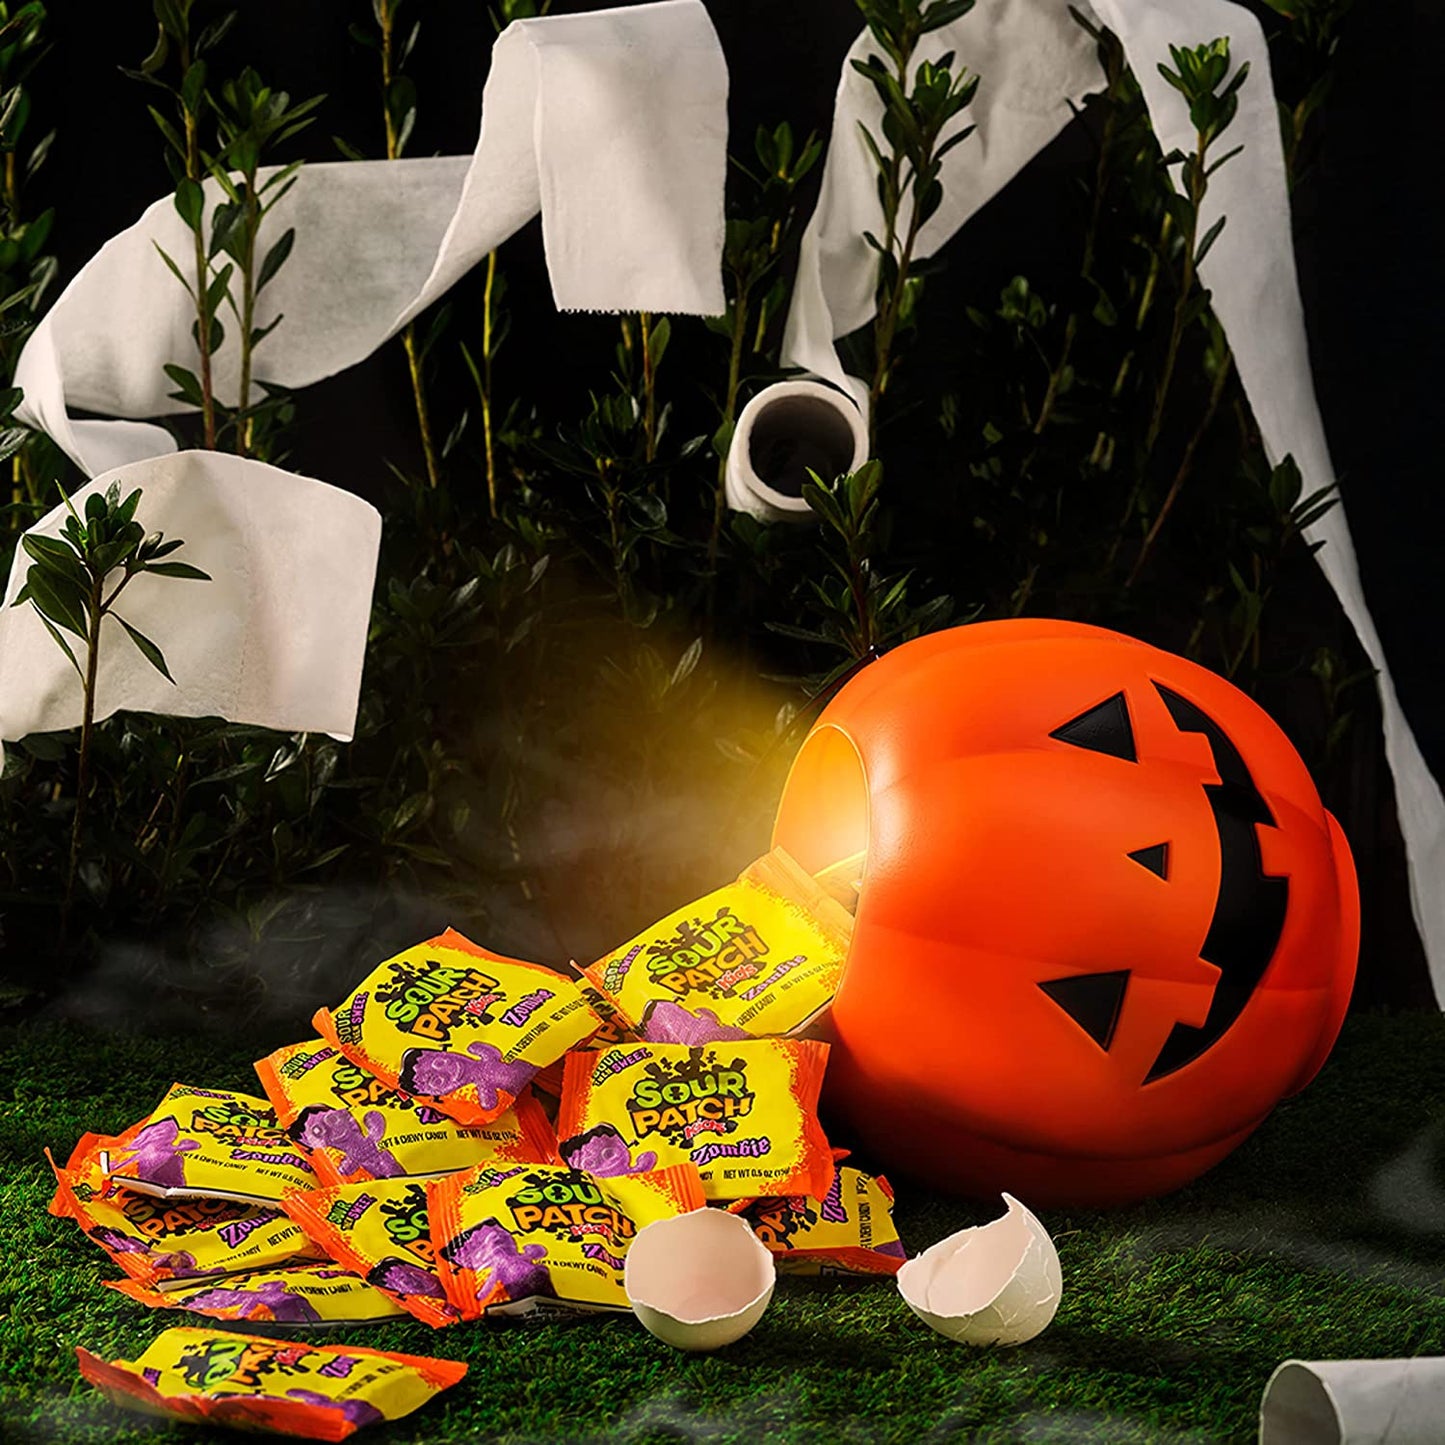 SOUR PATCH KIDS Zombie Orange & Purple Halloween Candy, 80 Trick or Treat Snack Packs